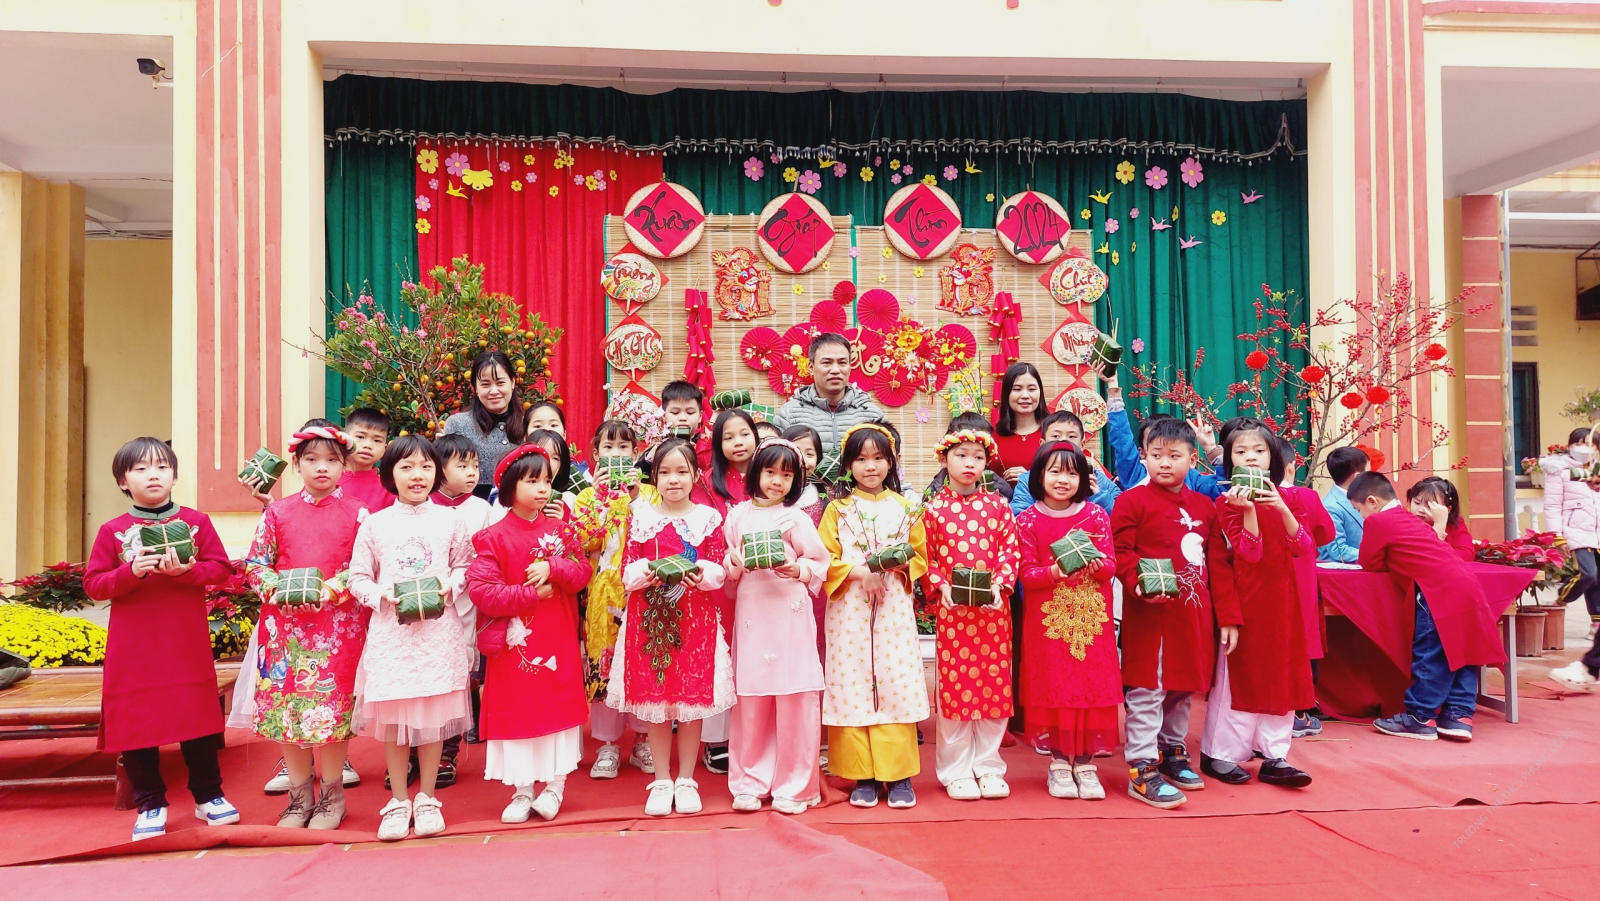 A group of children posing for a photo  Description automatically generated